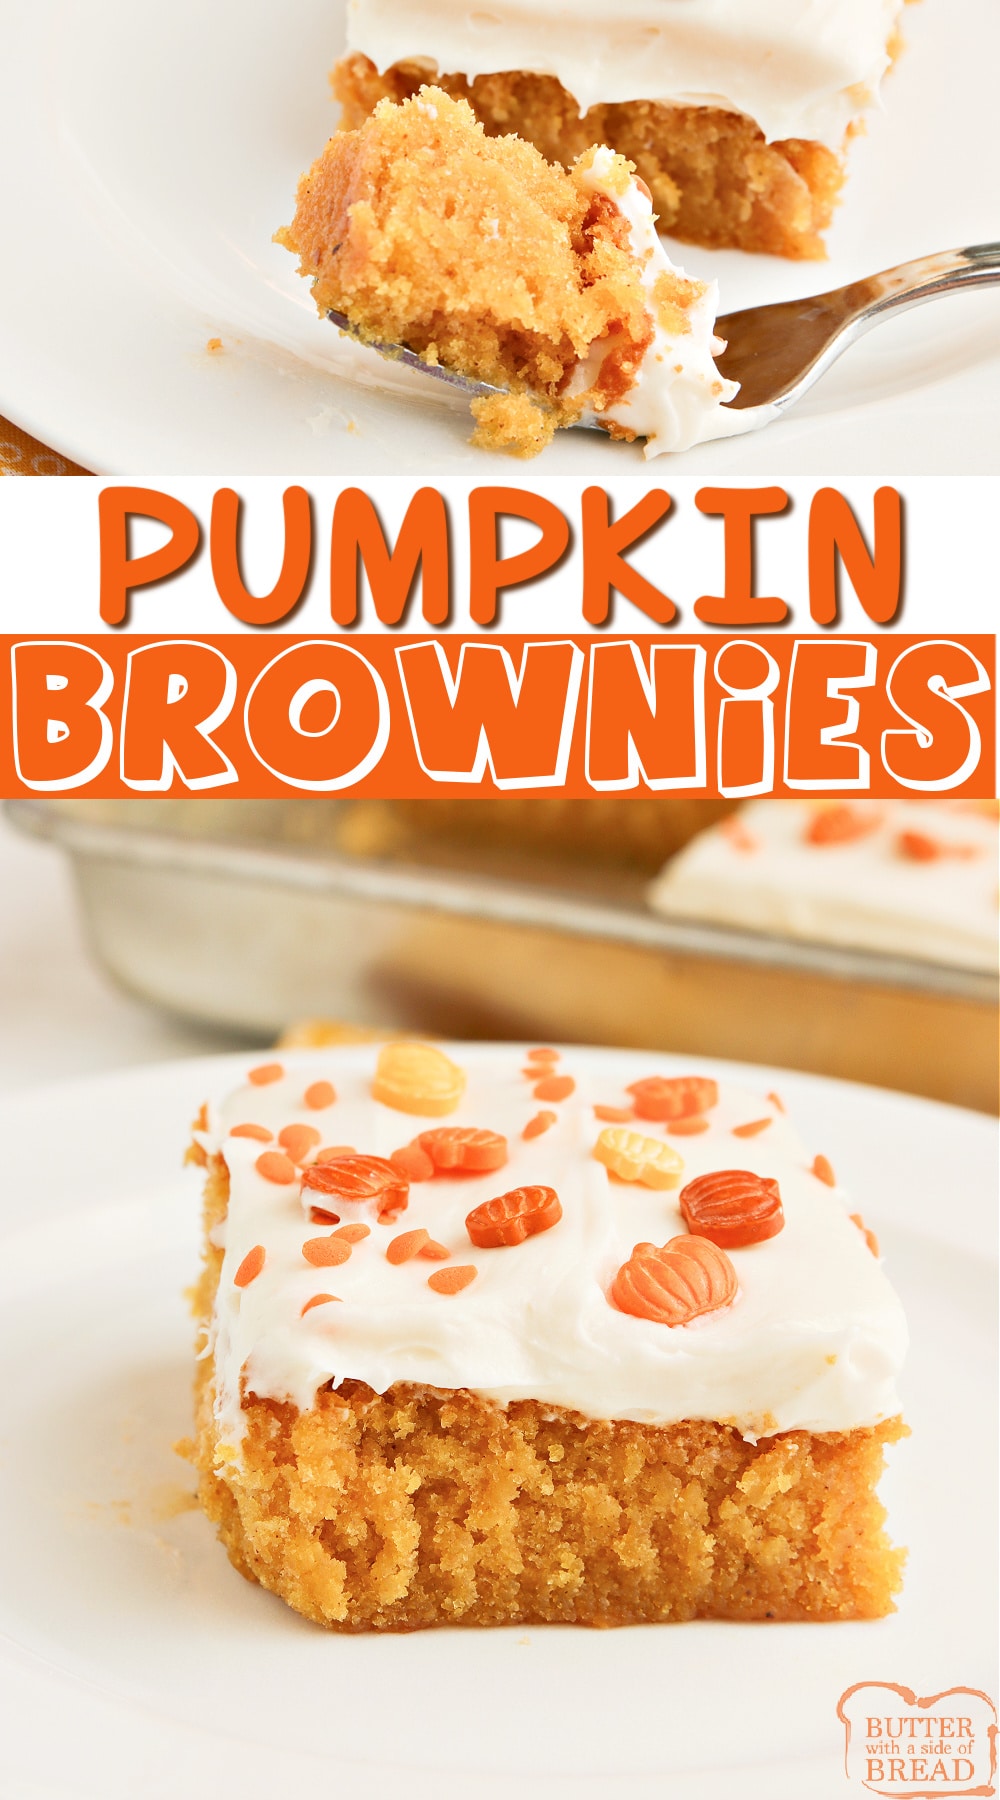 Pumpkin Brownies made with pumpkin, cinnamon and pumpkin spice and then topped with a delicious cream cheese frosting. Soft, moist and absolutely the perfect fall dessert!